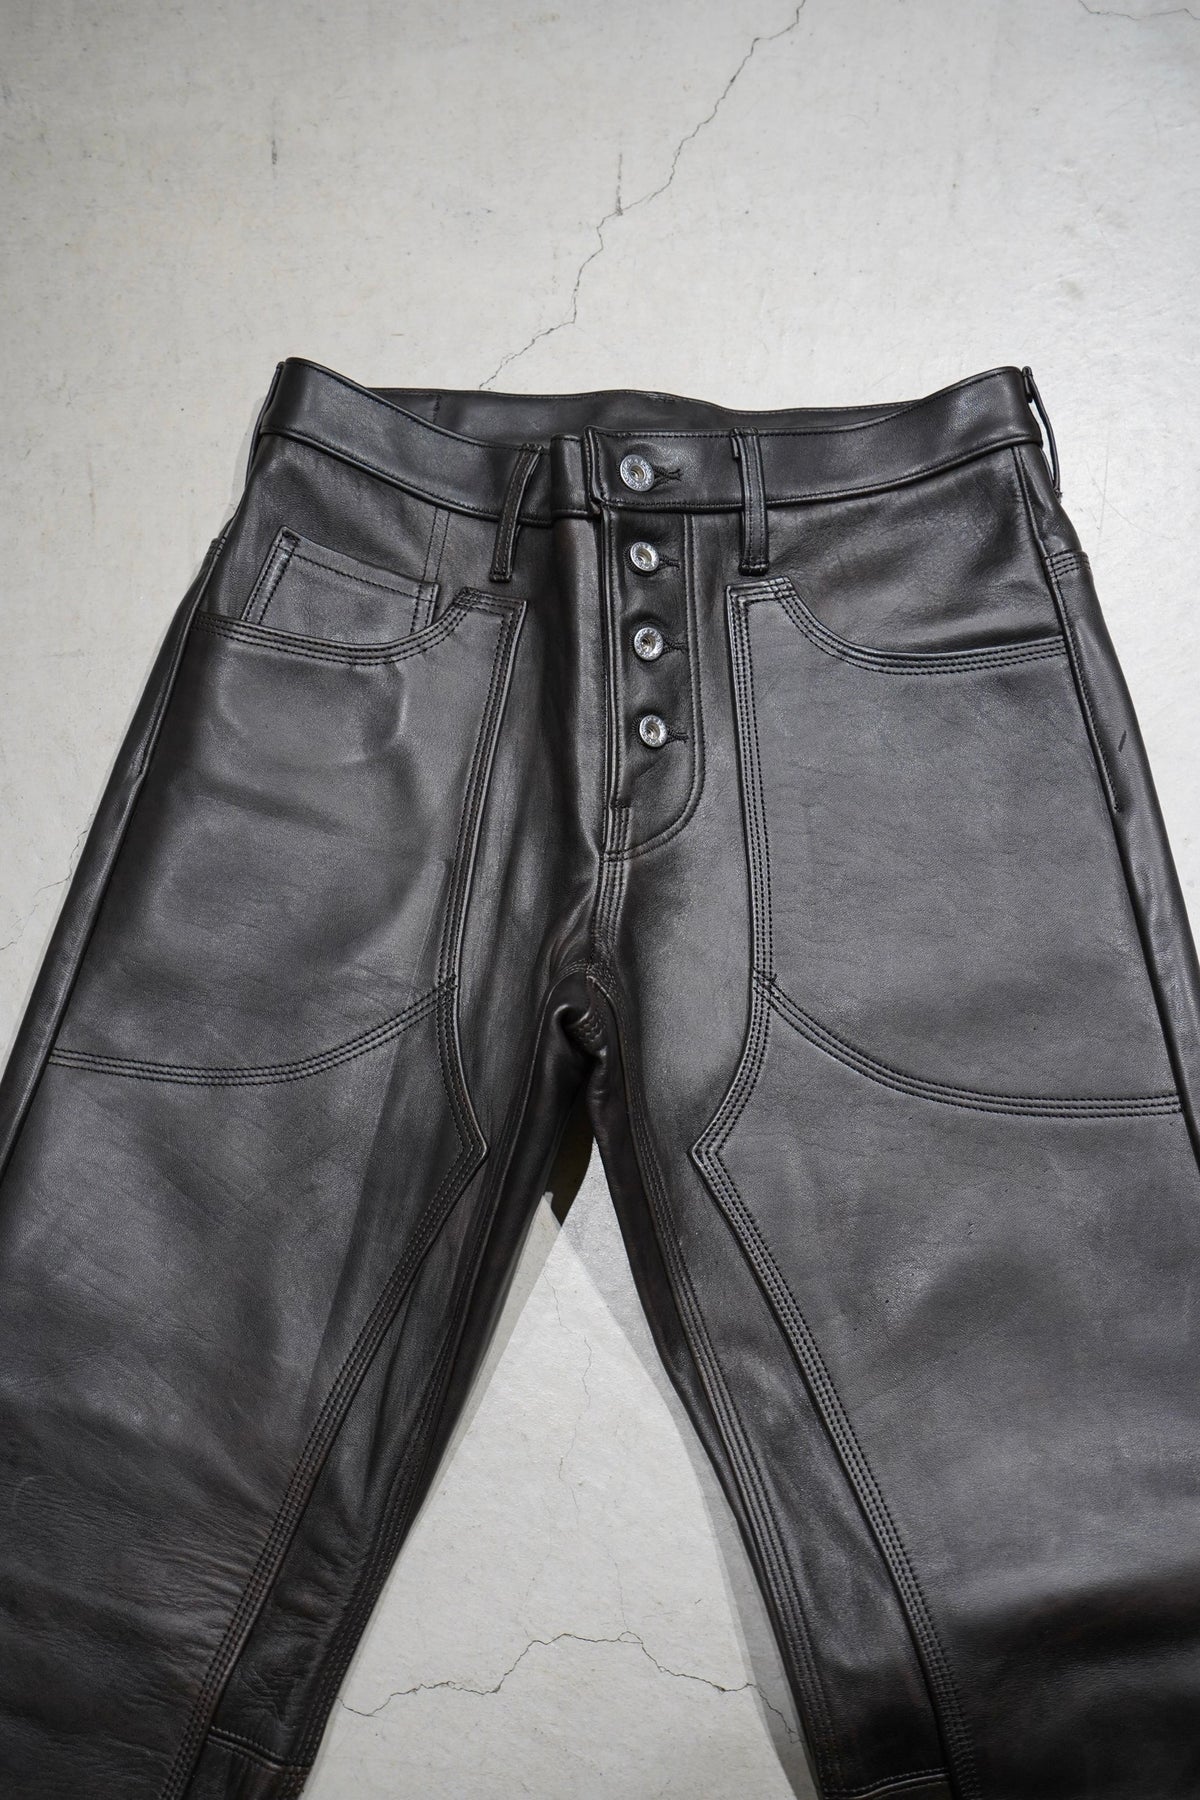 Sugarhill's Oil Horse Double Knee Pants (Pants) Mail Order ...